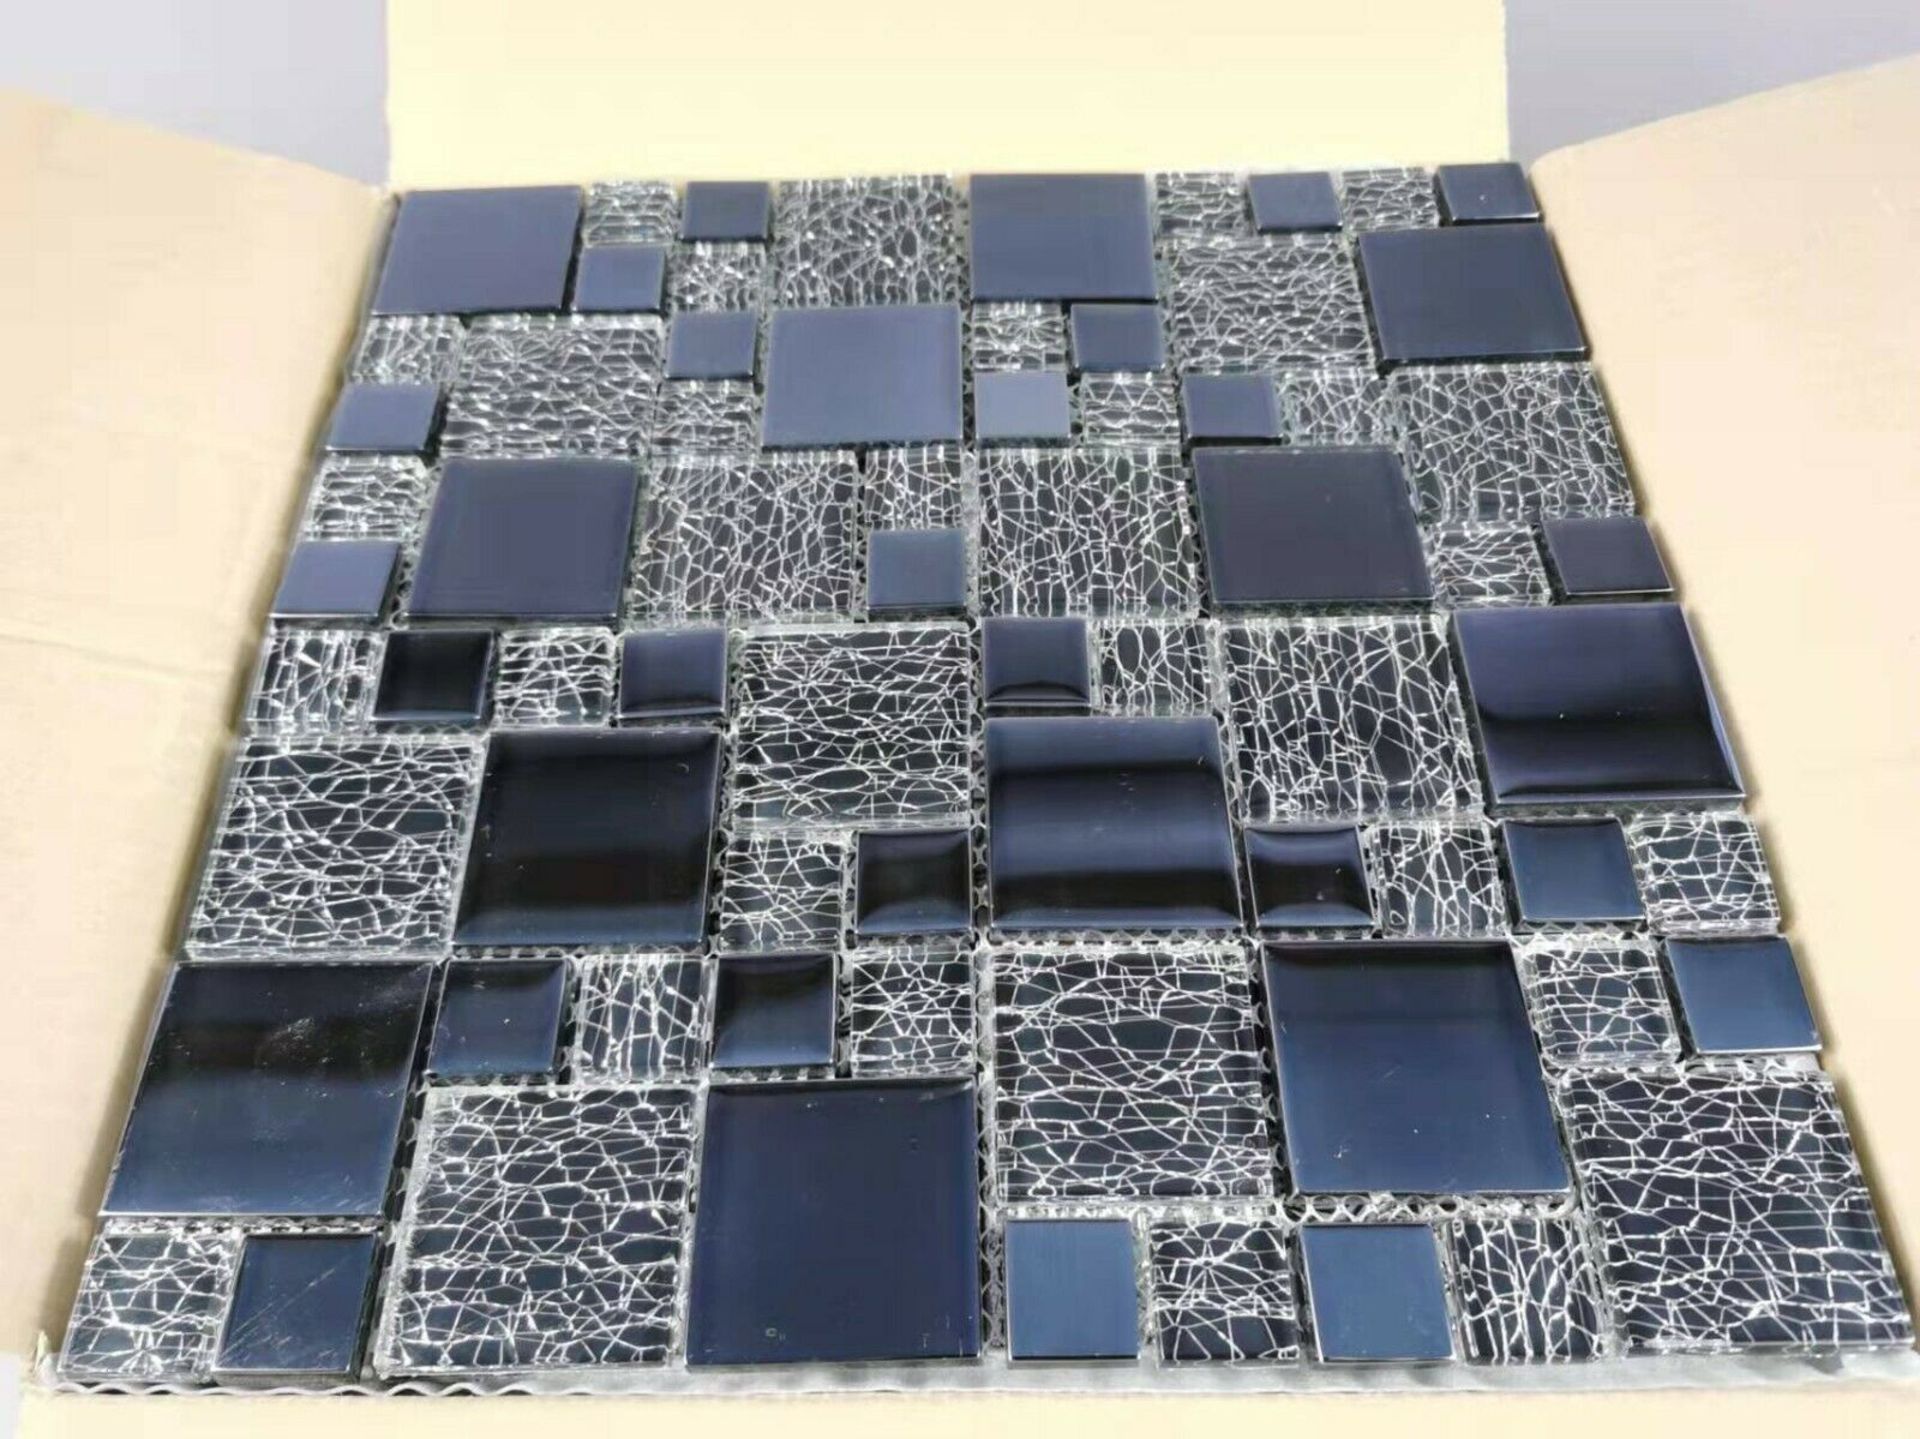 5 Square Metres - High Quality Glass/Stainless Steel Mosaic Tiles-55 sheets - Image 2 of 5